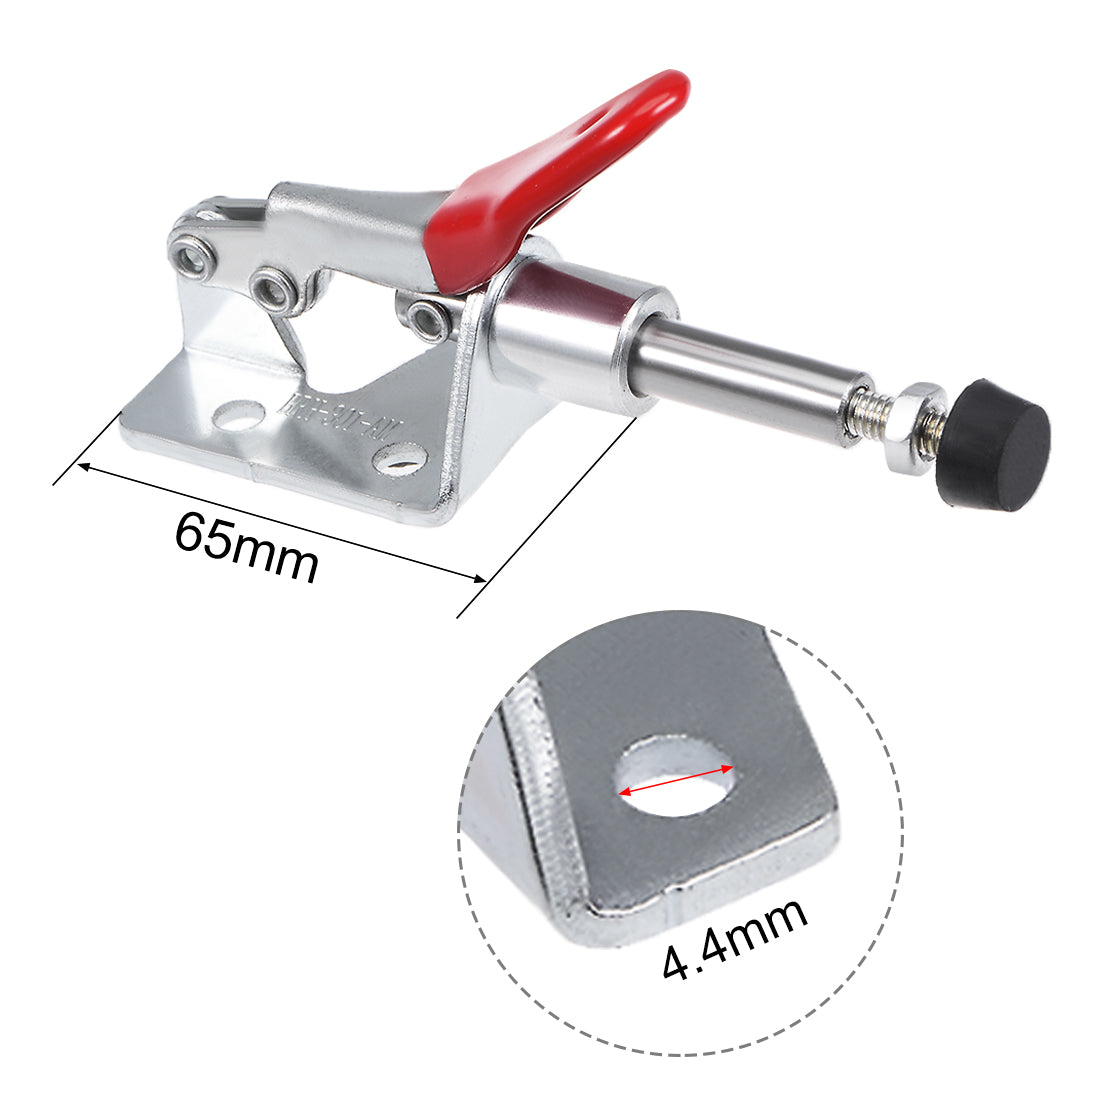 Uxcell Uxcell Toggle Clamp 45kg 99lbs Holding Capacity 16.7mm Stroke Push Pull Action Hand Tool BRH-301-AM 3pcs